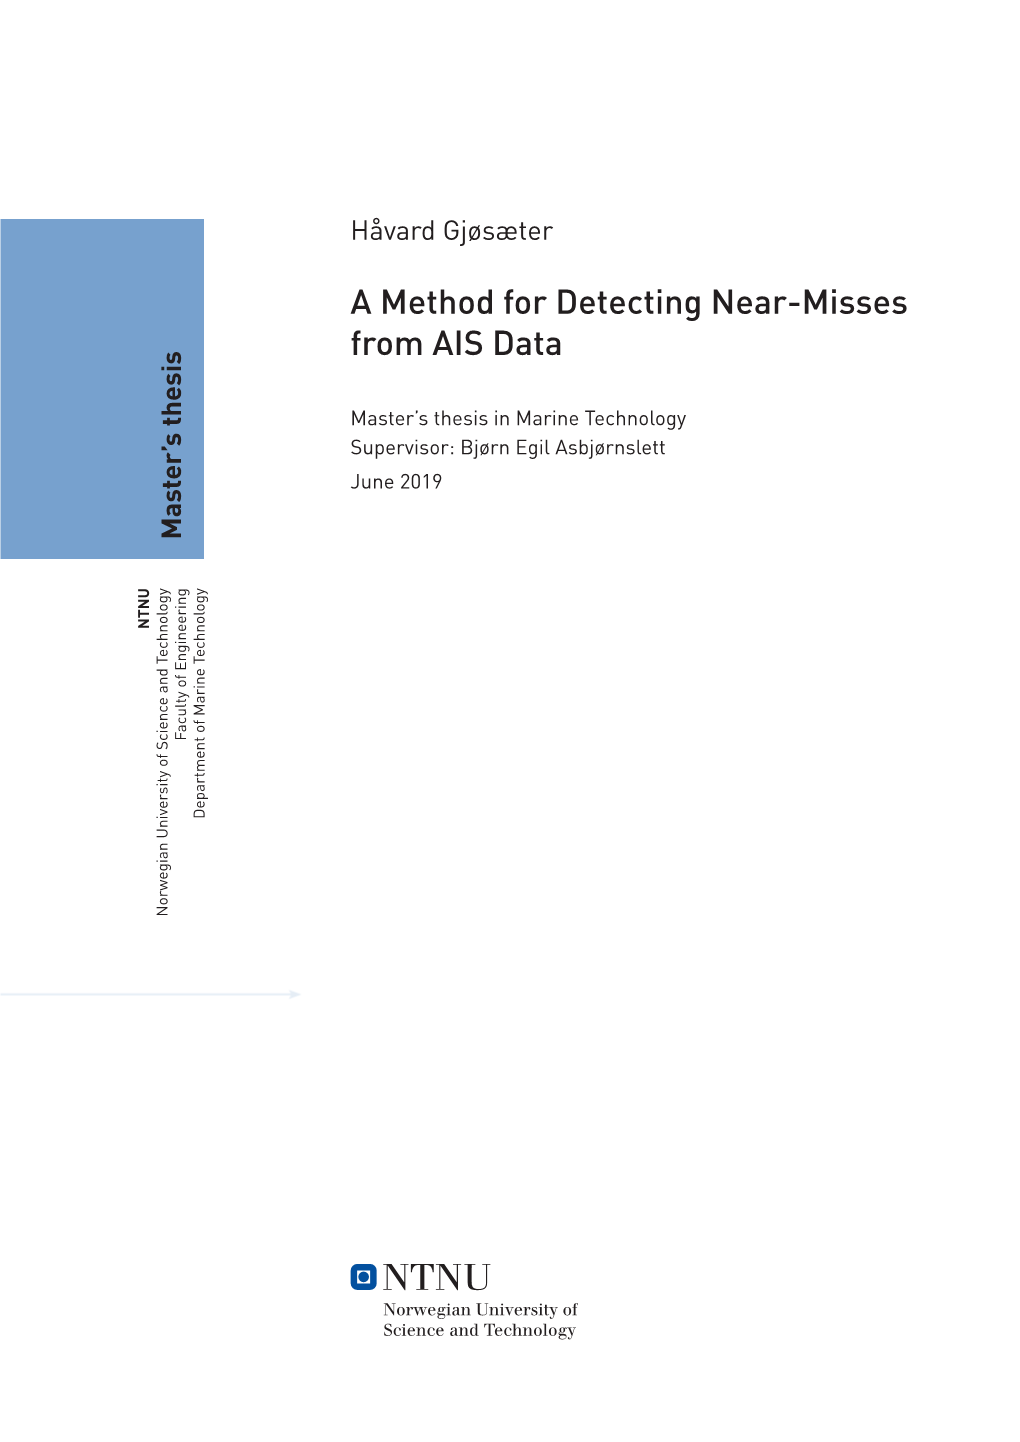 A Method for Detecting Near-Misses from AIS Data